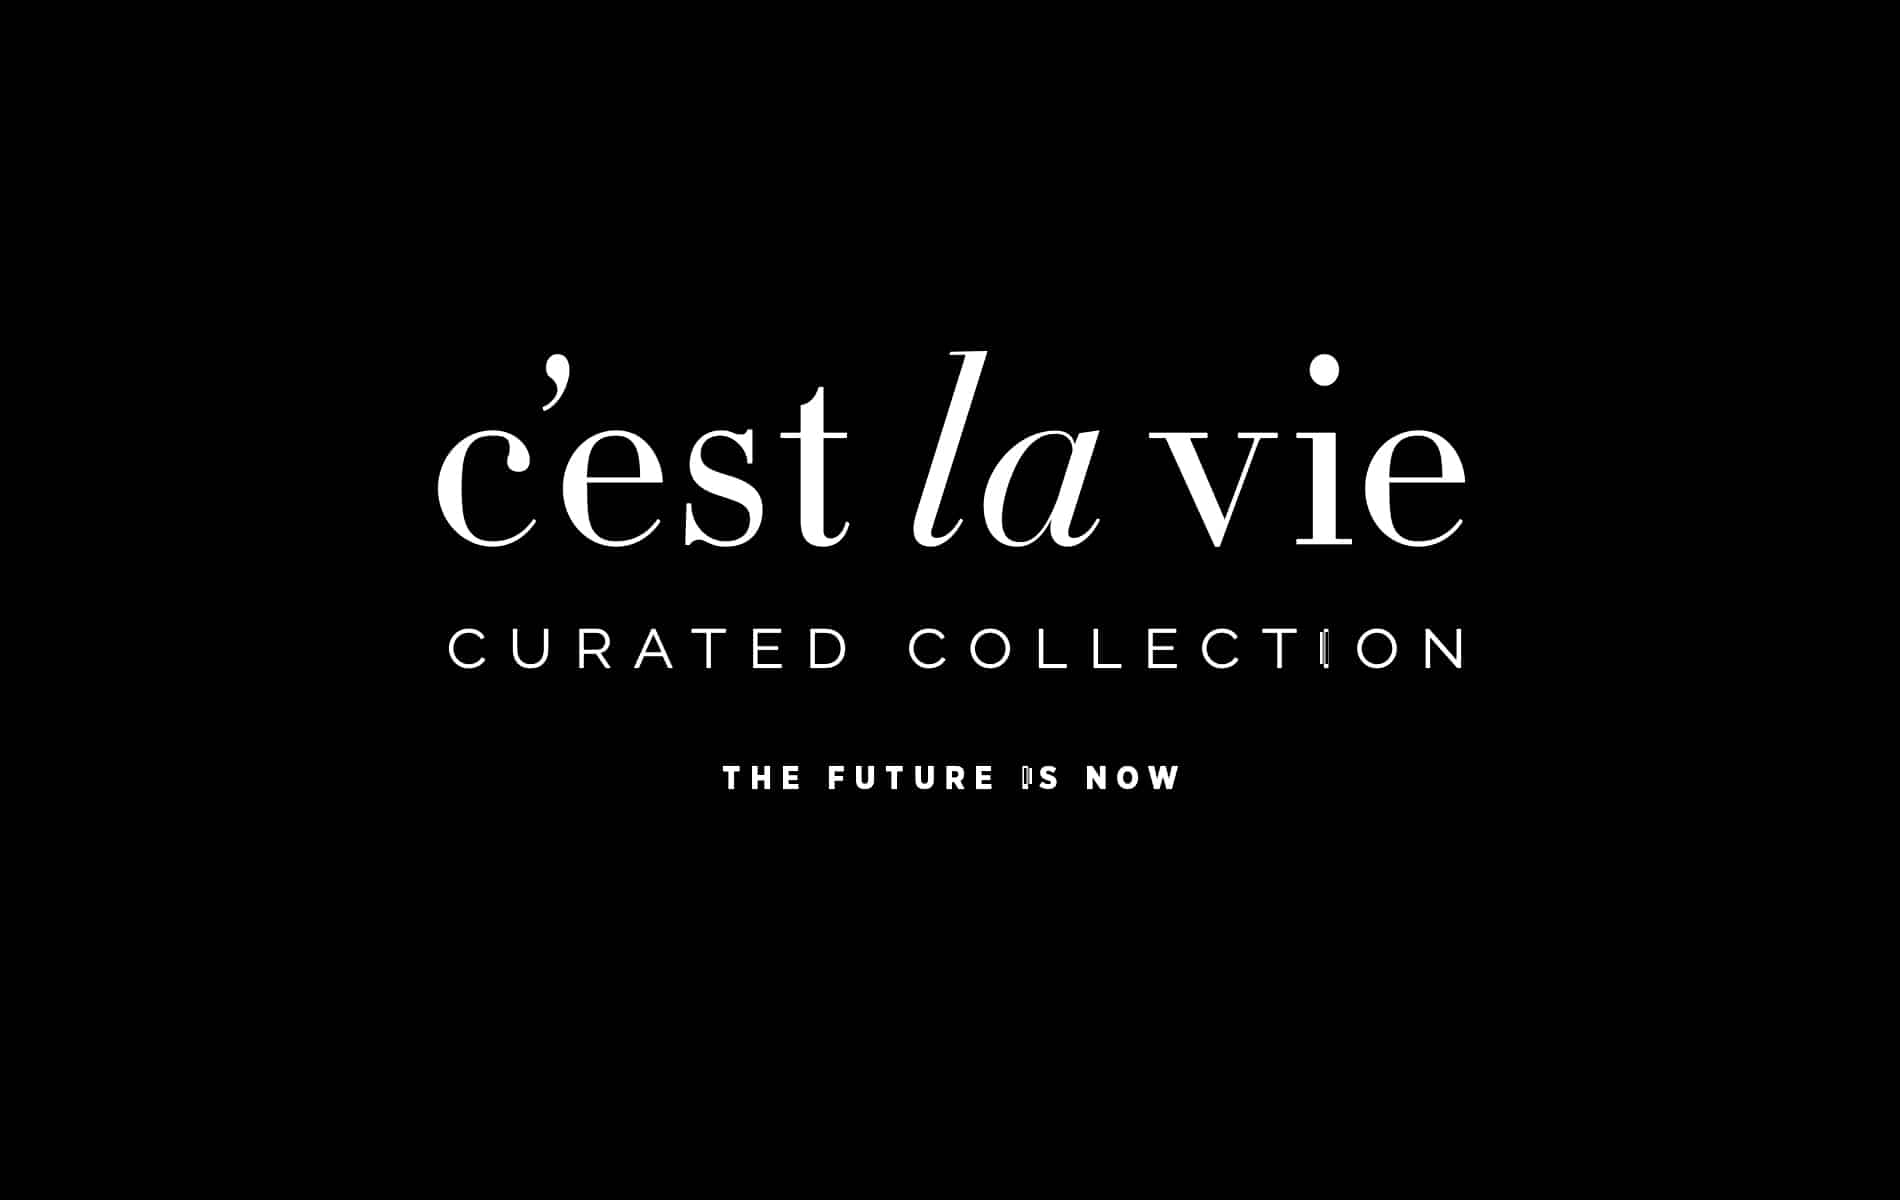 VIE Magazine C'est la VIE A Curated Collection, The Future is Now, February 2019 Luxury Homes & Technology issue